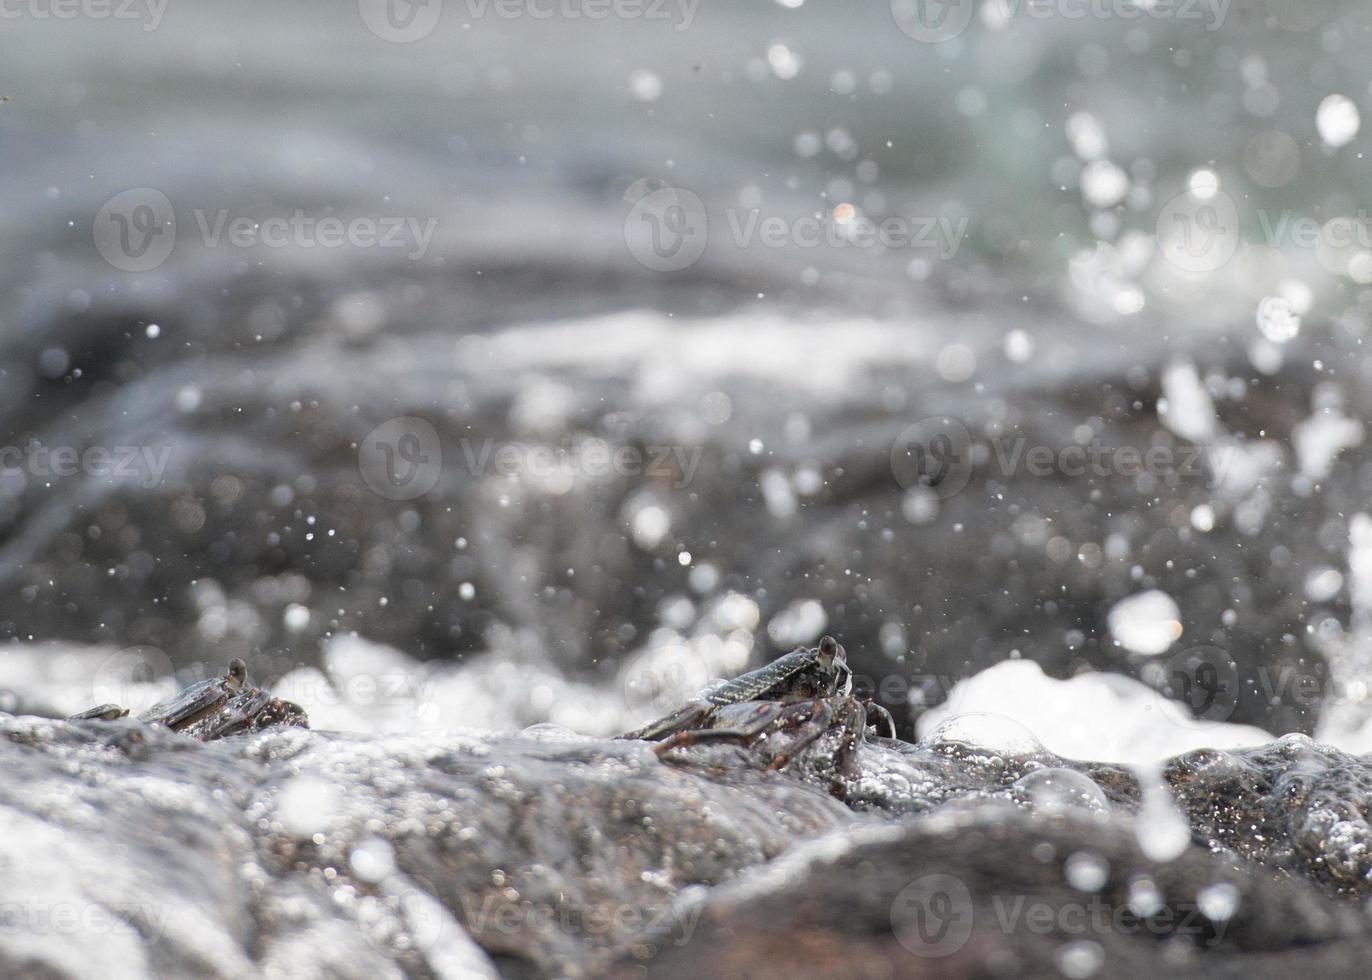 crab on the lava rocks in hawaii photo